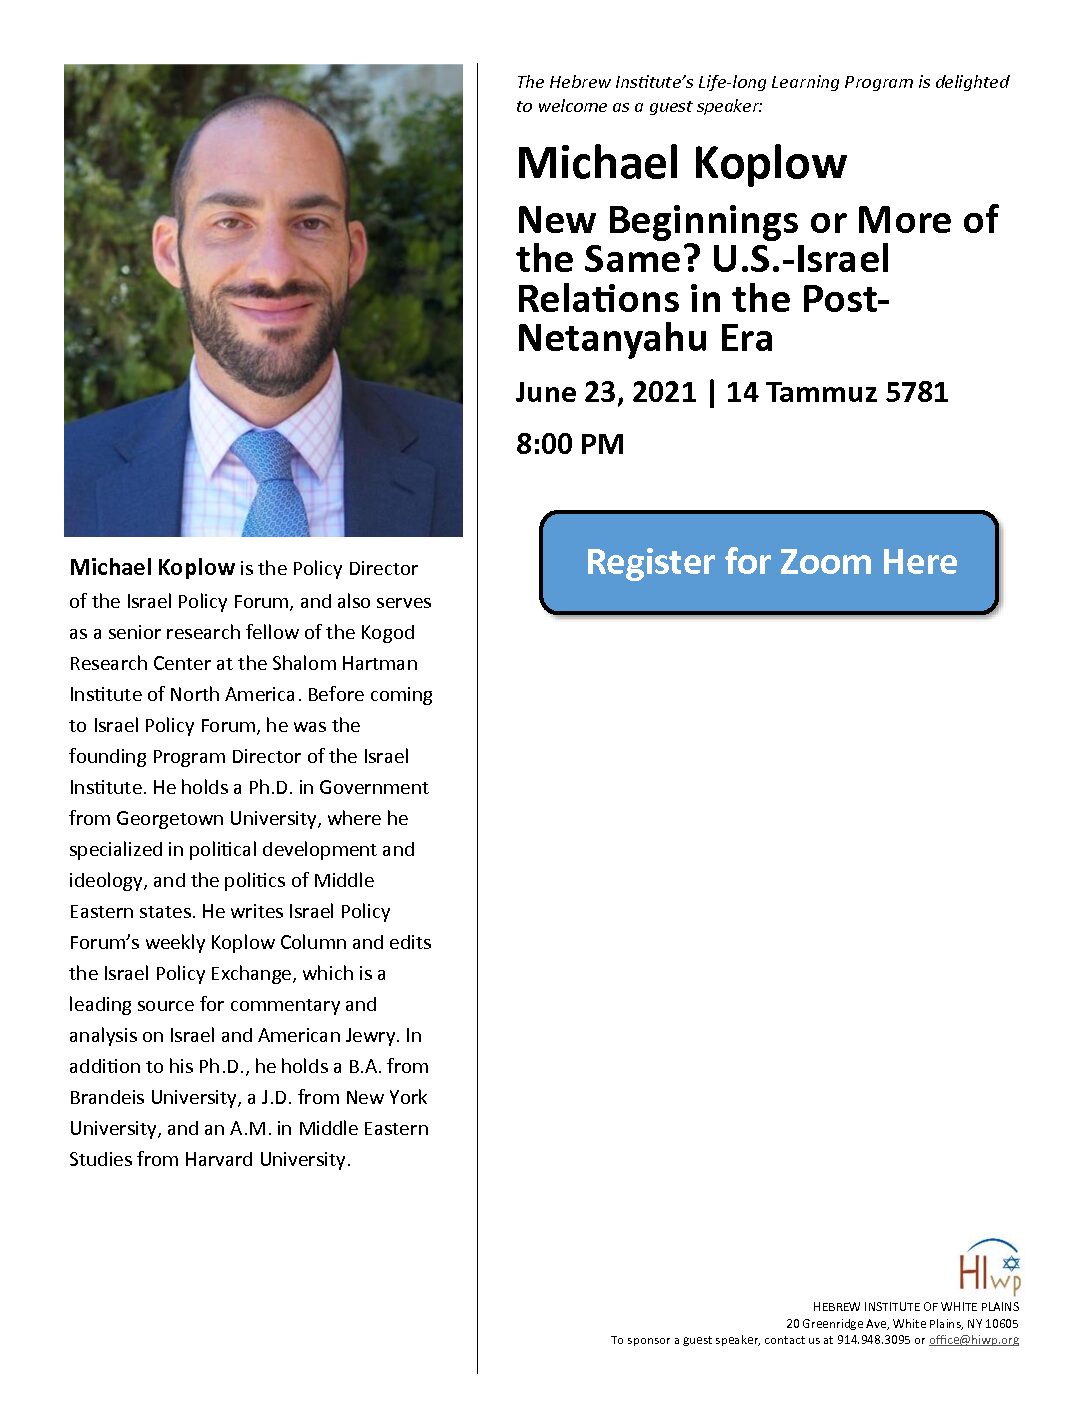 Hebrew Institute of White Plains - New Beginnings or More of the Same? U.S.-Israel Relations in the Post-Netanyahu Era with Michael Koplow, Israel Policy Forum